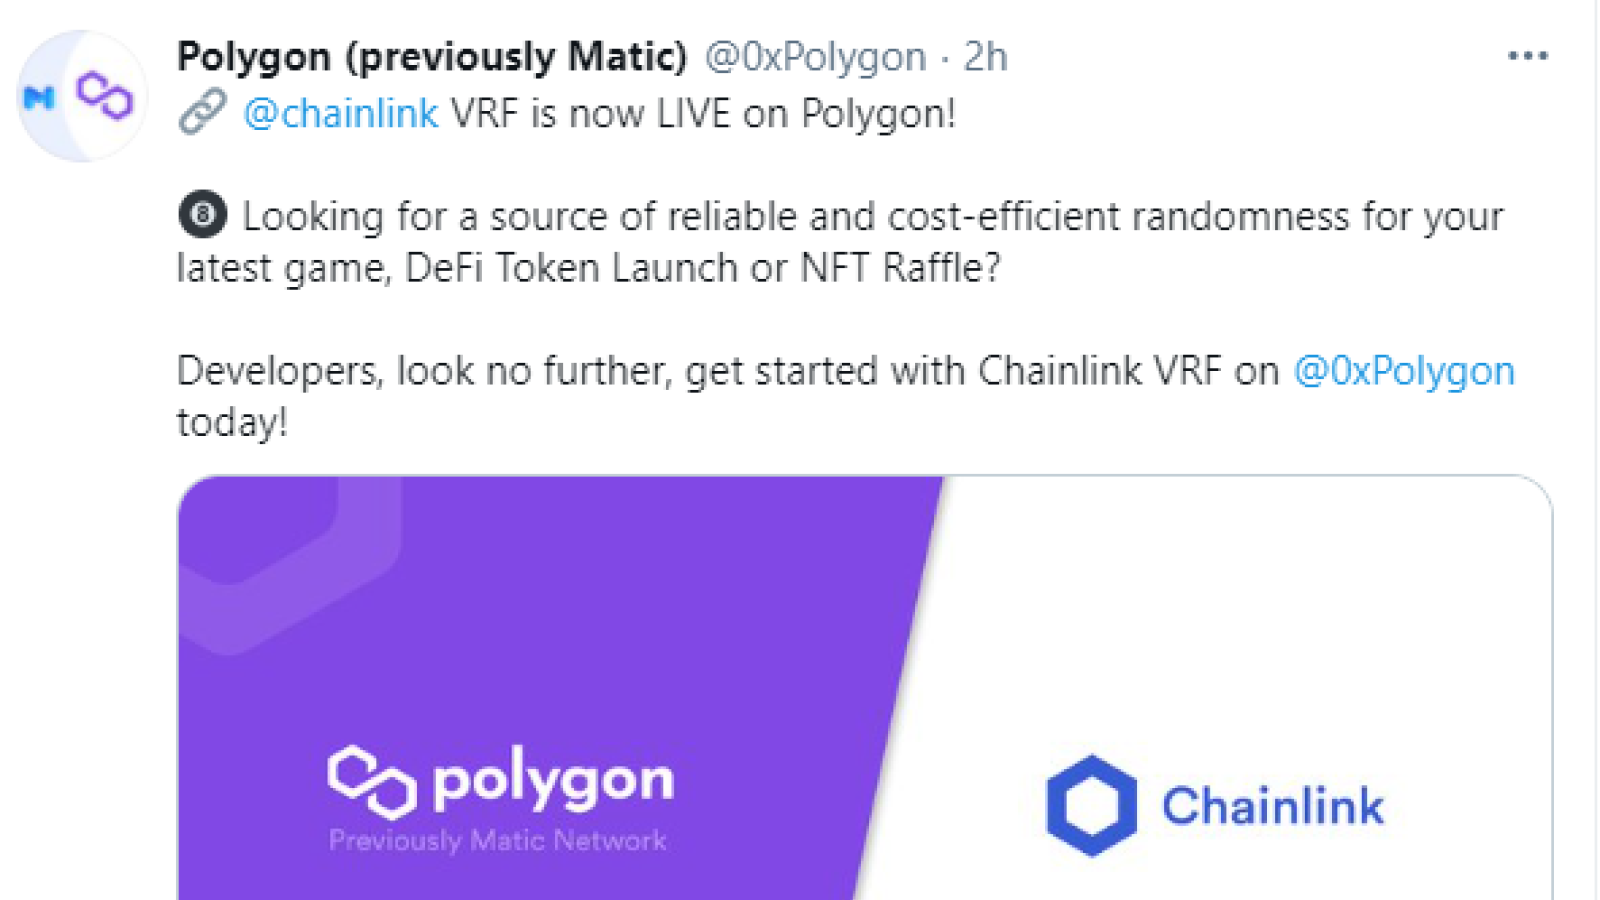 Chainlink VRF implemented by Polygon